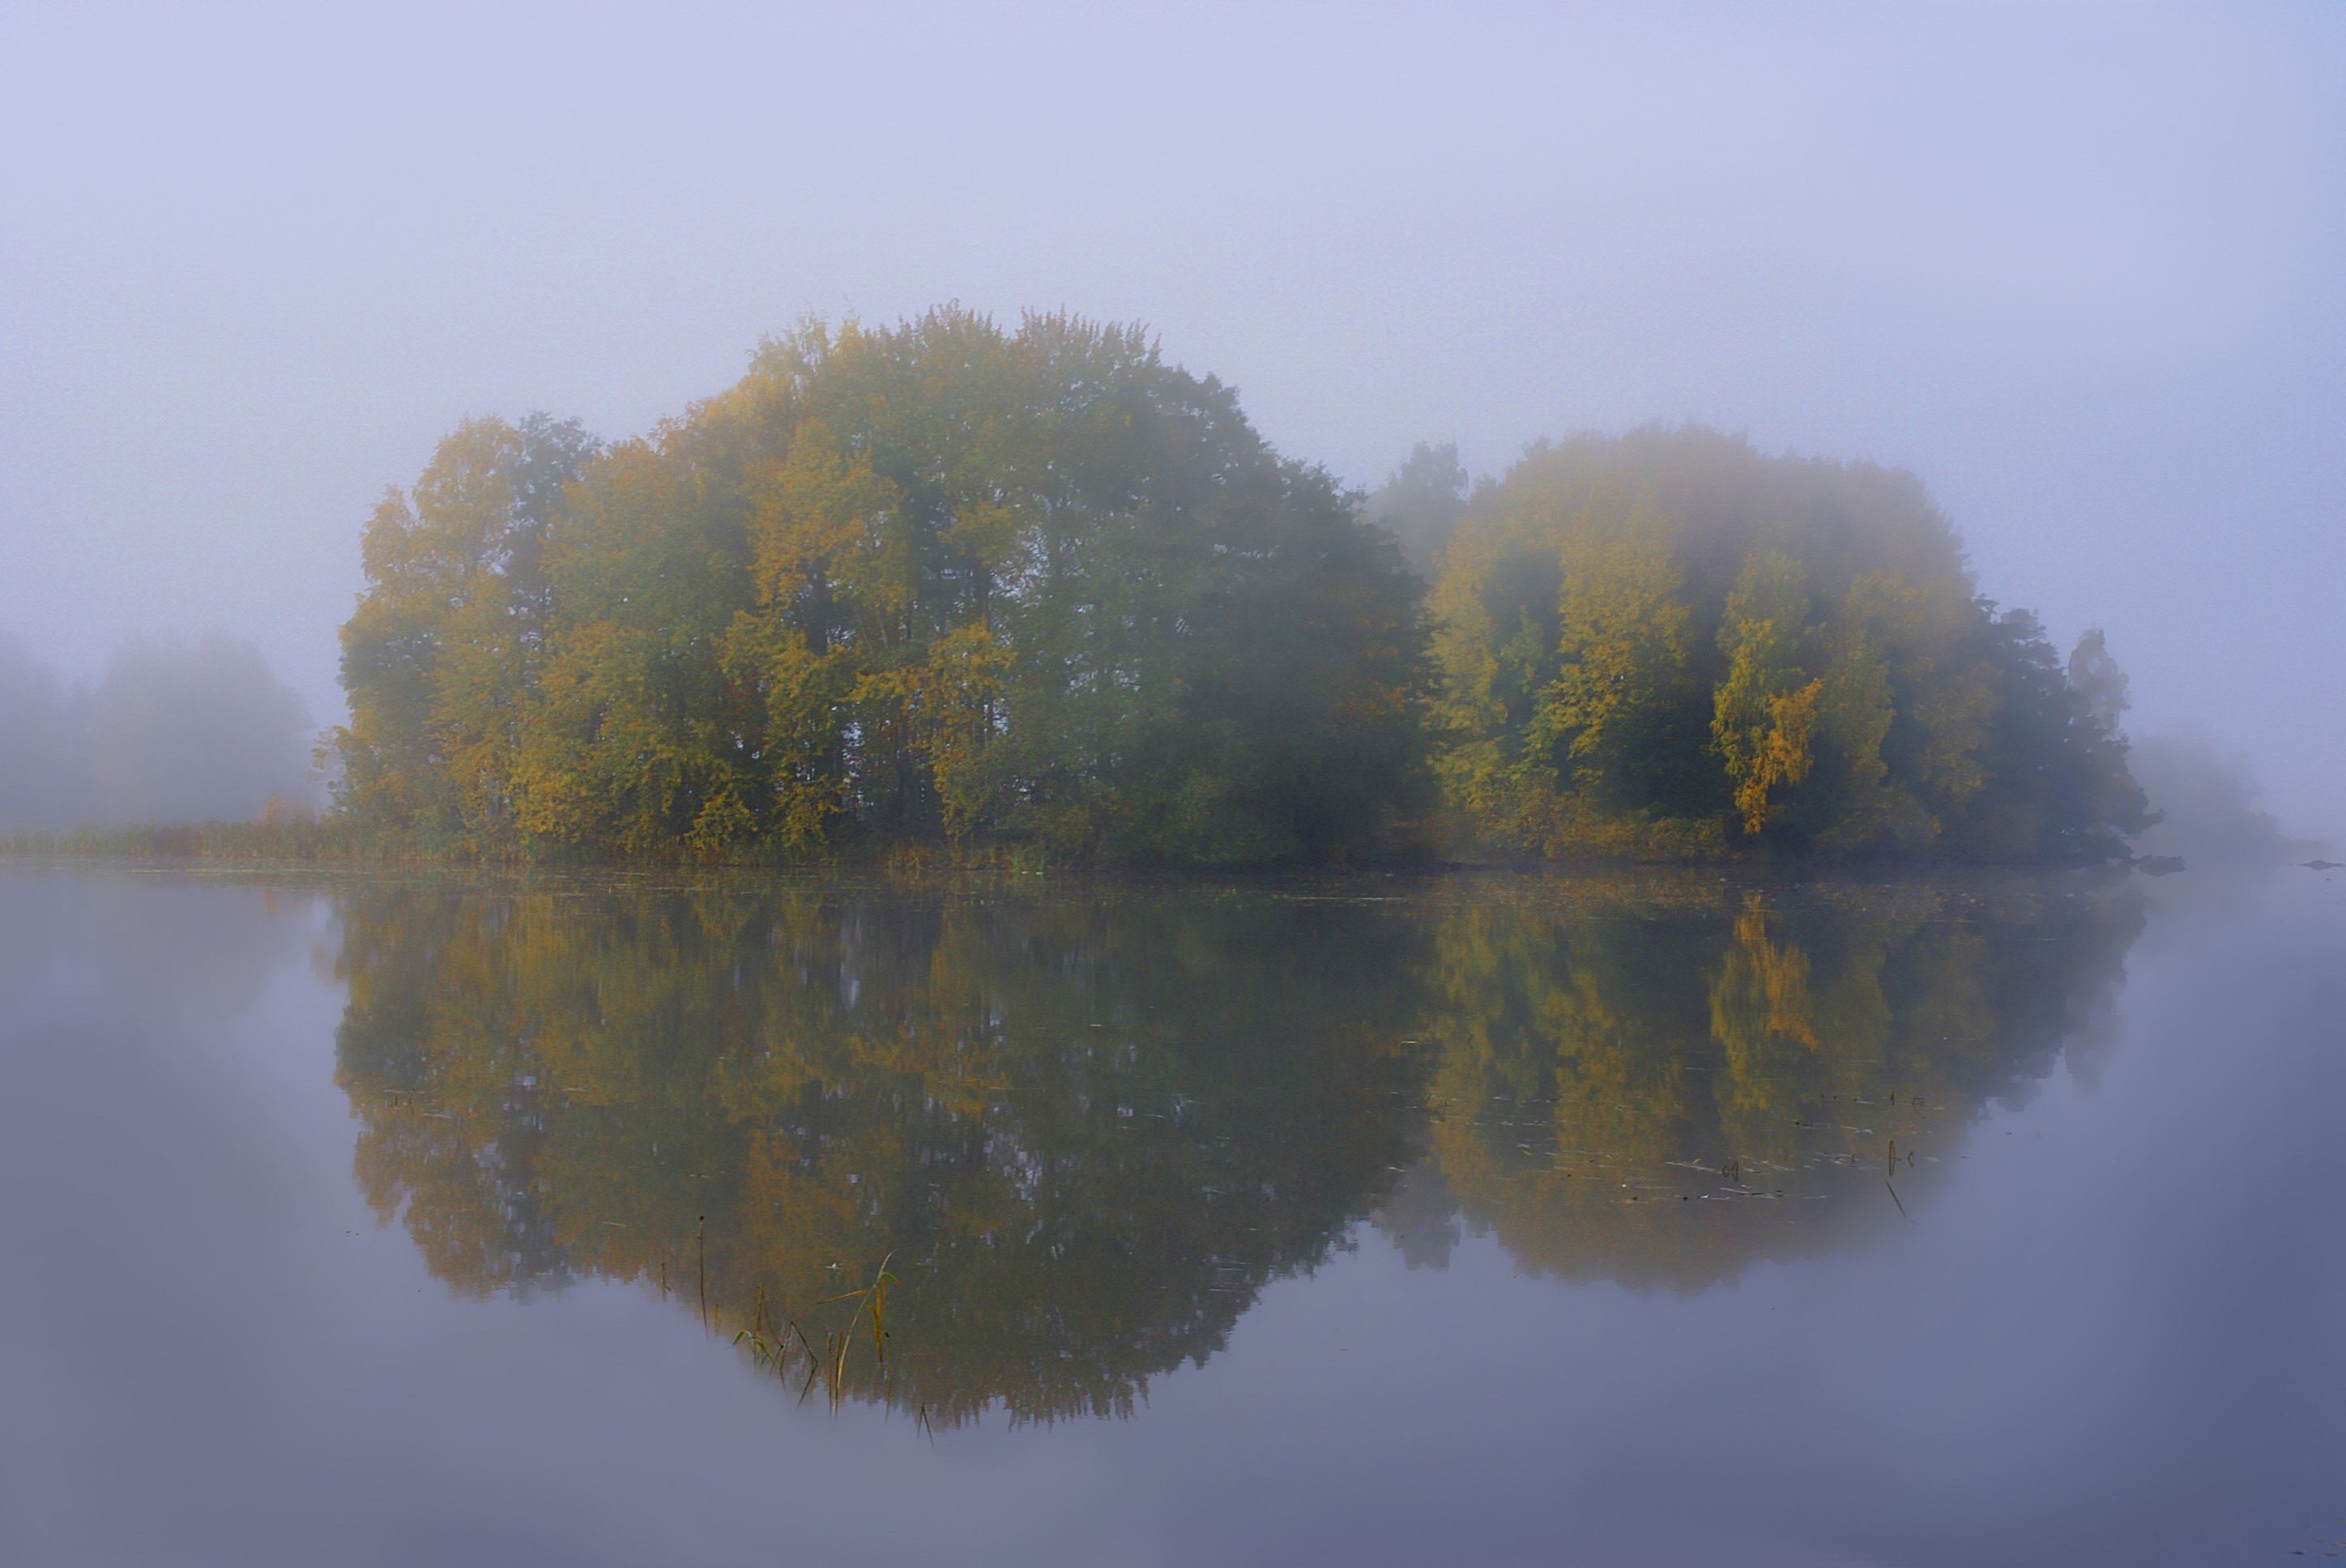 trees surrounded by body of water during fog weather